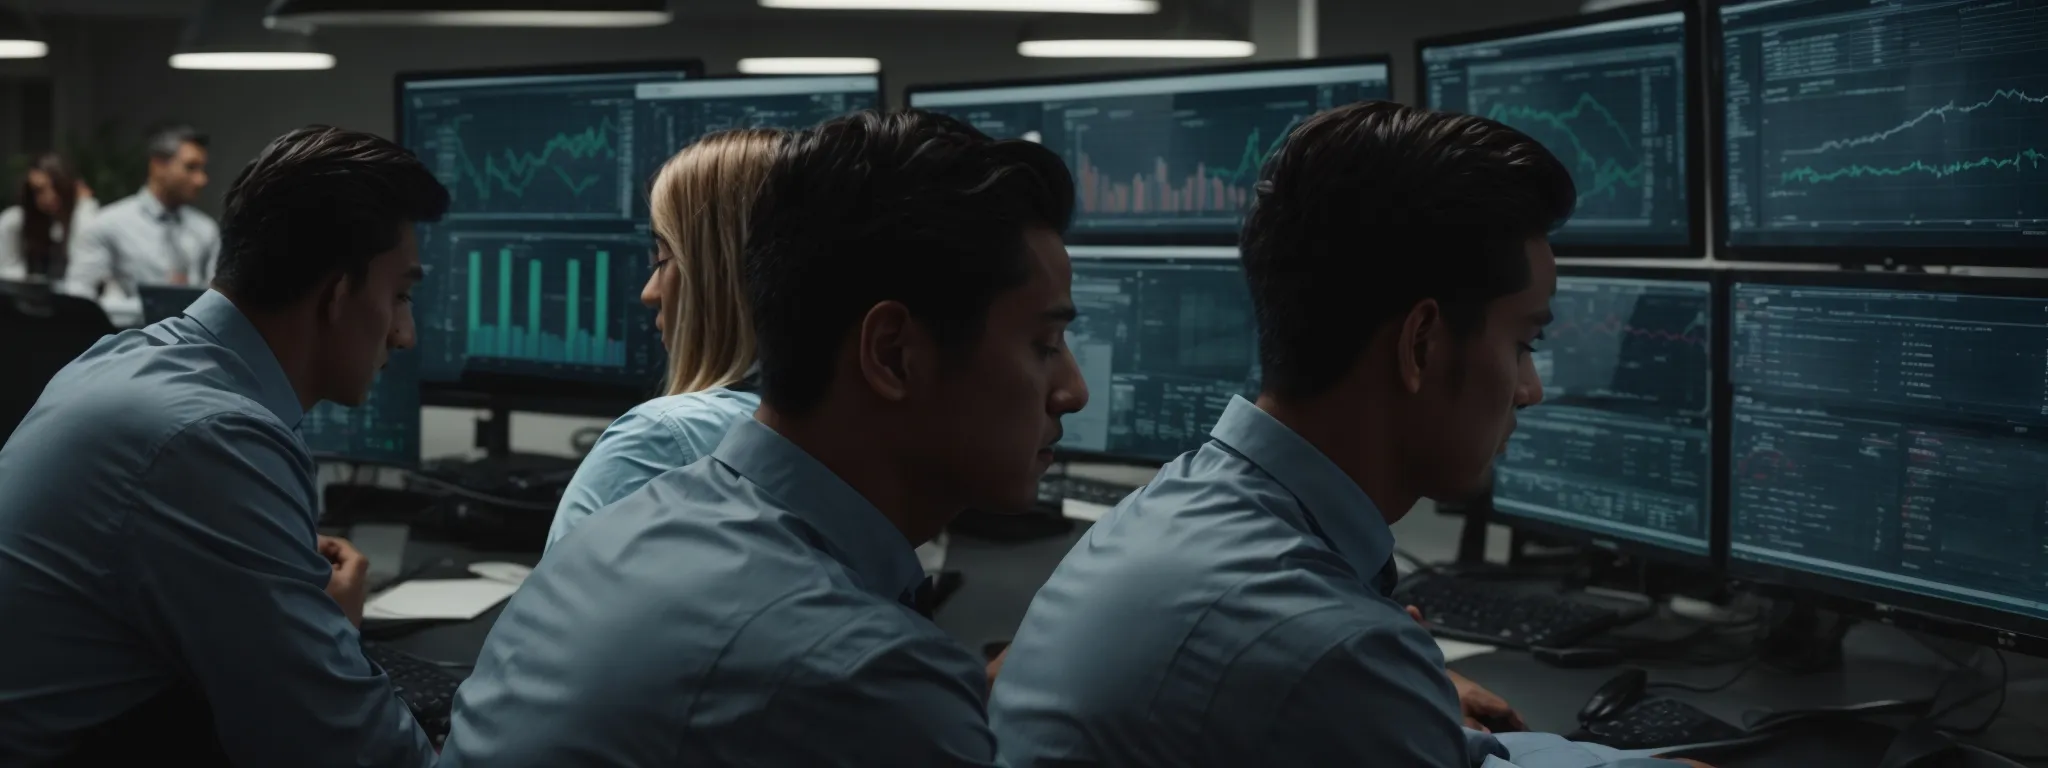 a group of focused professionals intently studying complex analytics dashboards on computer screens in a modern office.